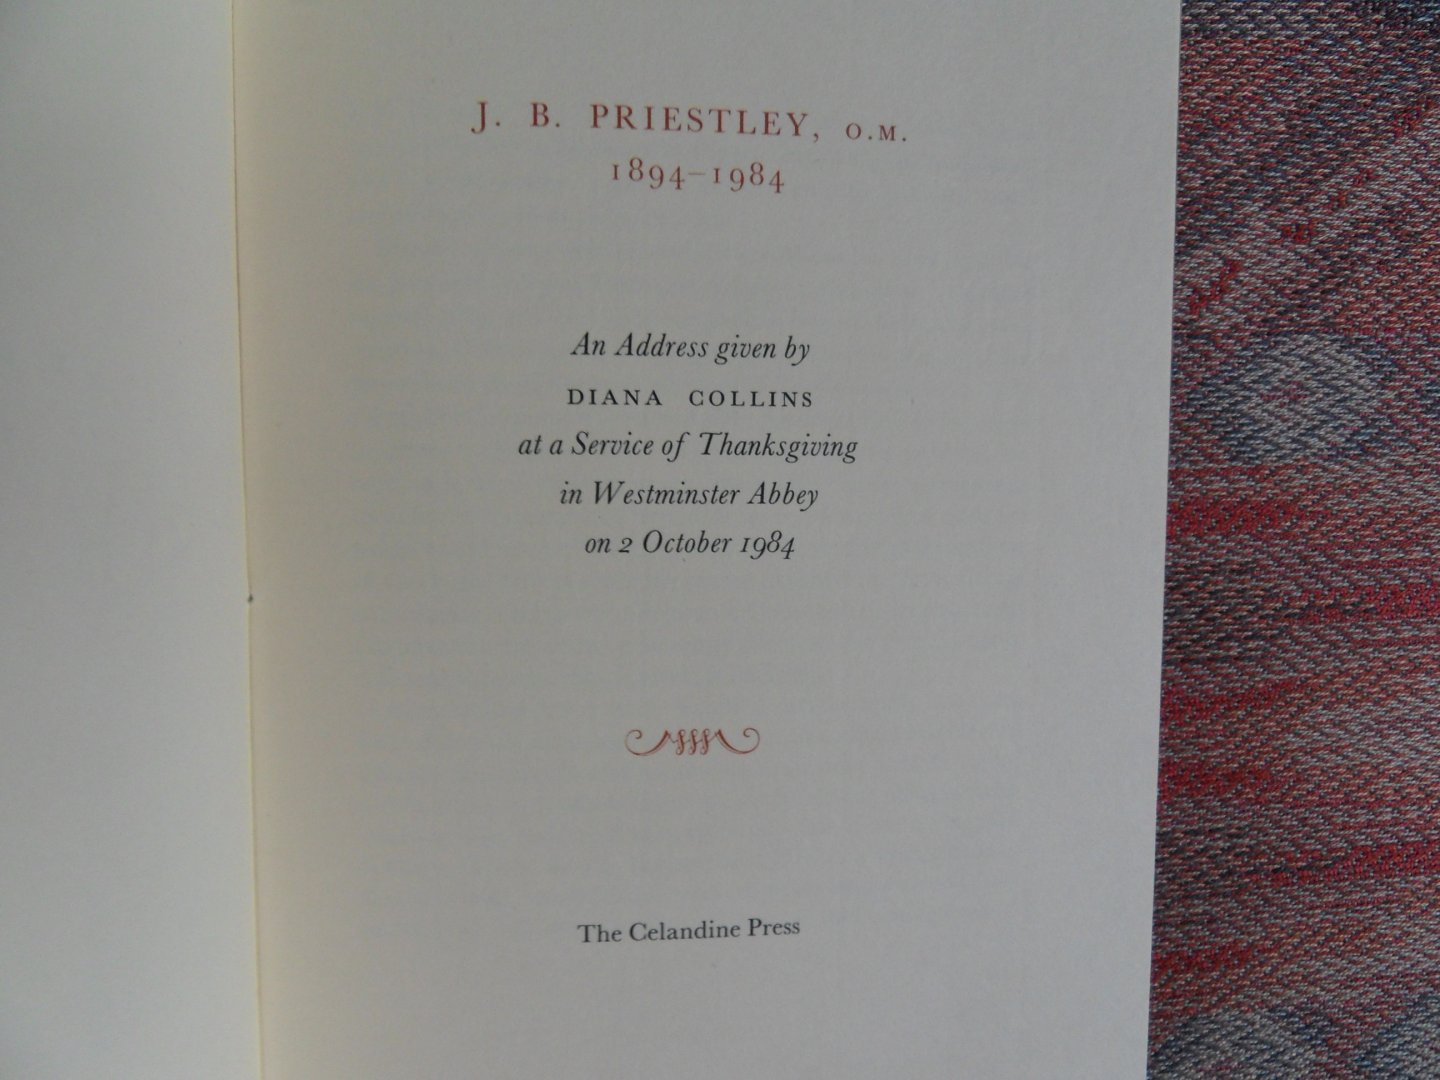 Collins, Diana. - J.B. Priestley. - 1894 - 1984. - An Address given by Diana Collins at a Service of Thanksgiving in Westminster Abbey on 2 October 1984.